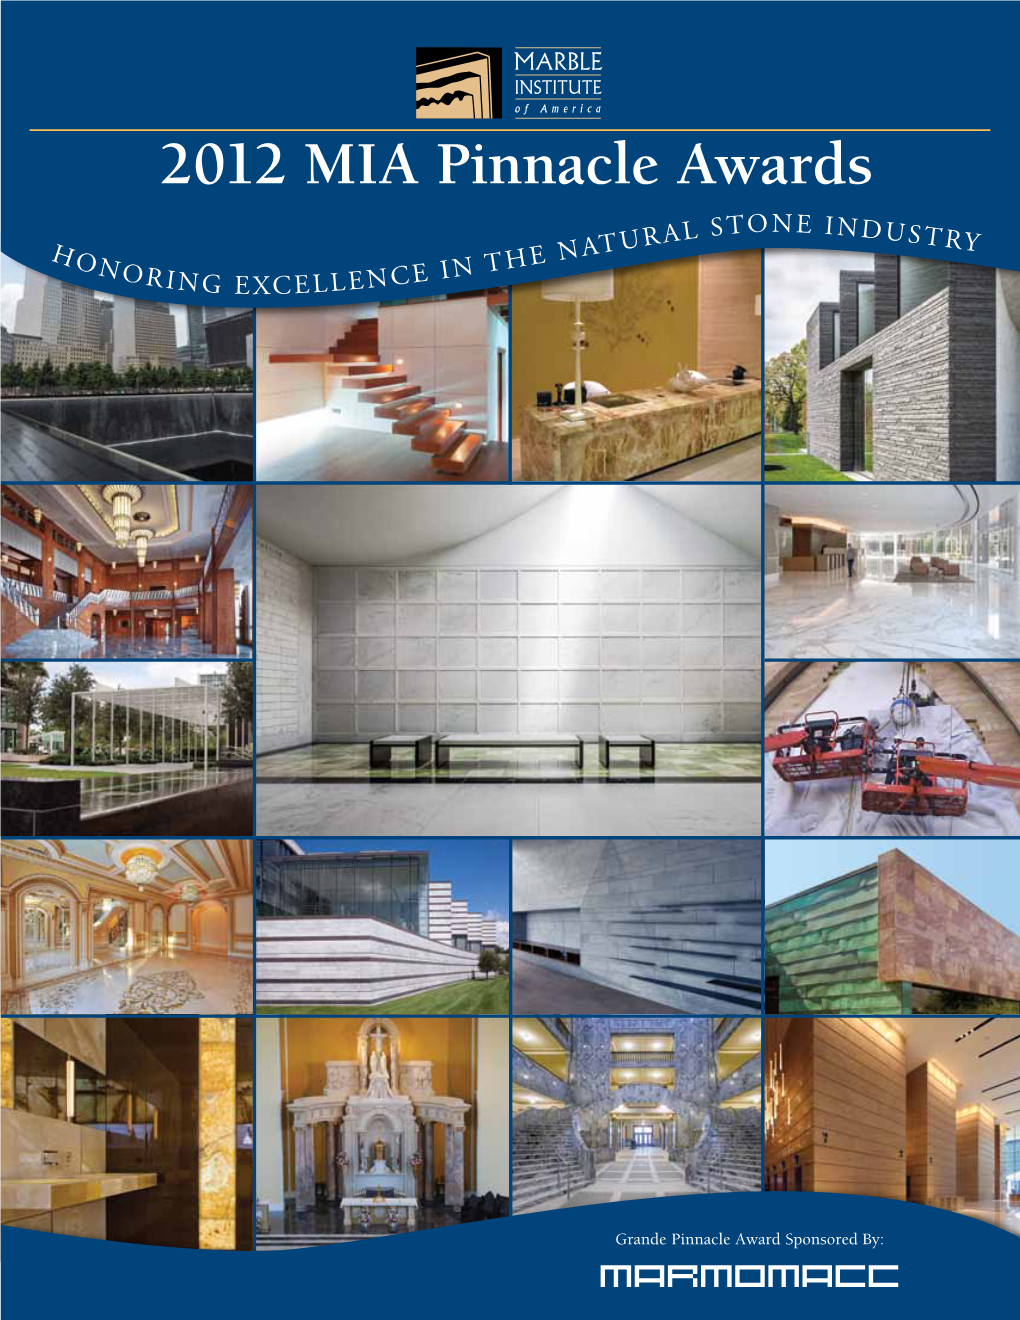 2012 MIA Pinnacle Awards STONE IND URAL USTRY H E NAT ONO in TH RING EXCELLENCE